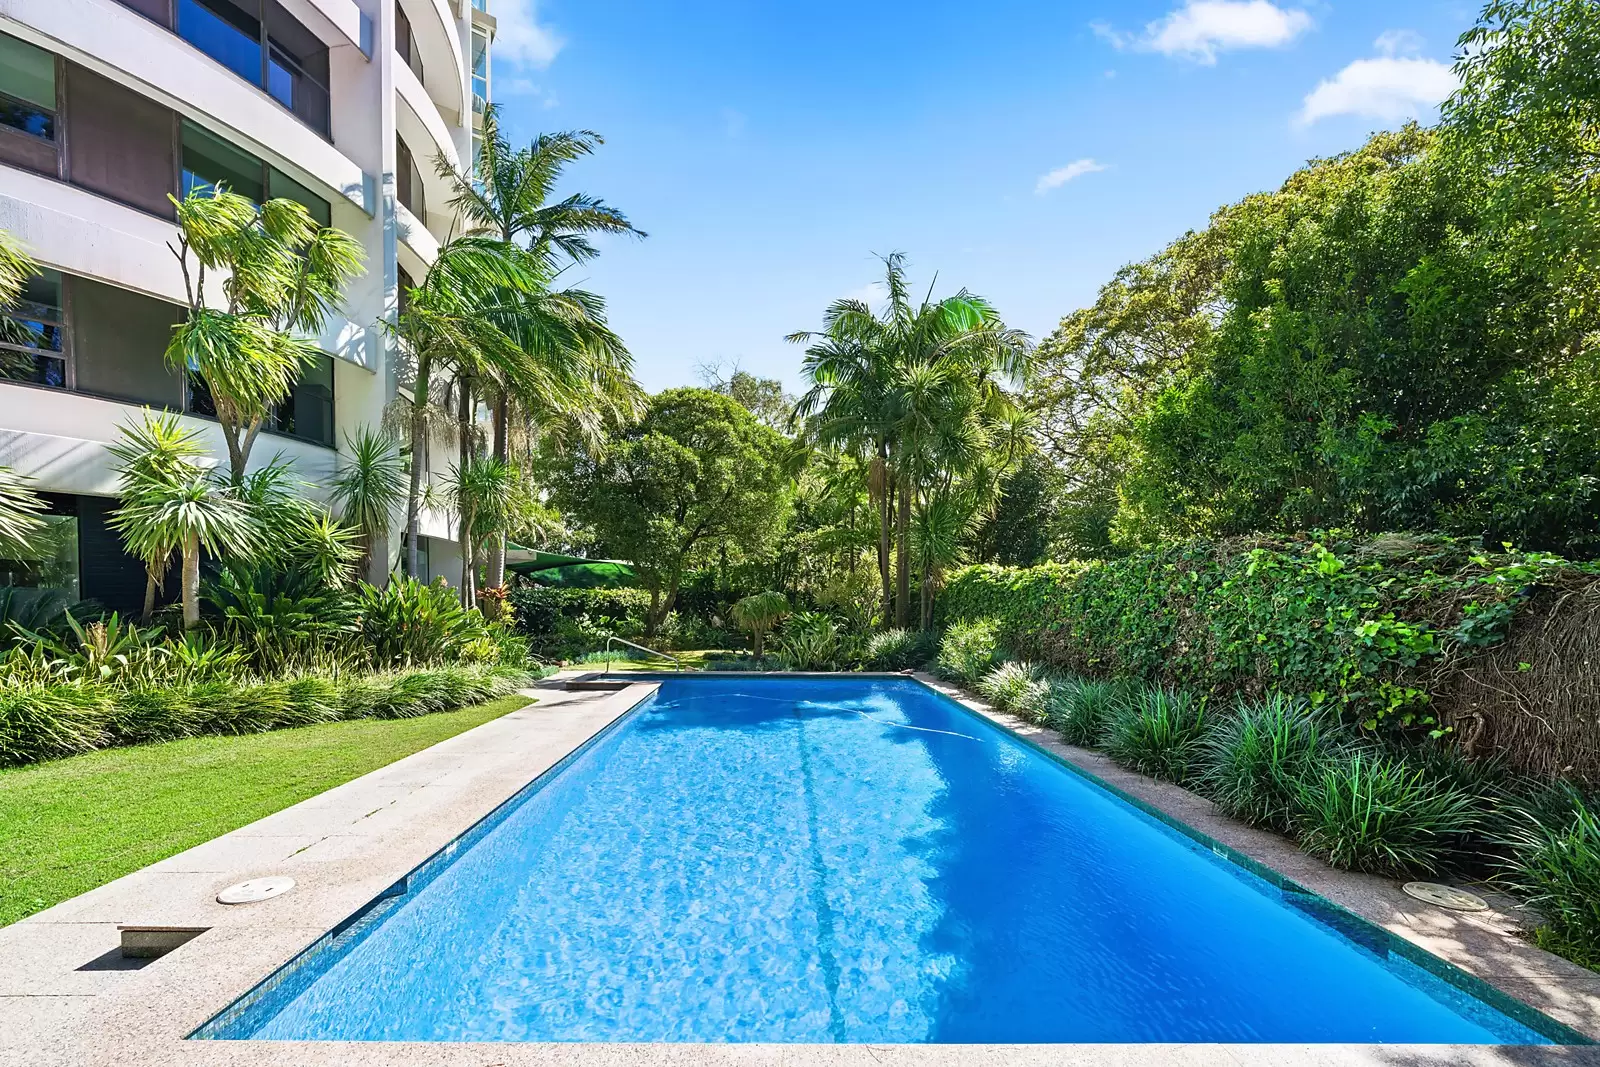 Photo #14: 9/75-79 Darling Point Road, Darling Point - Sold by Sydney Sotheby's International Realty